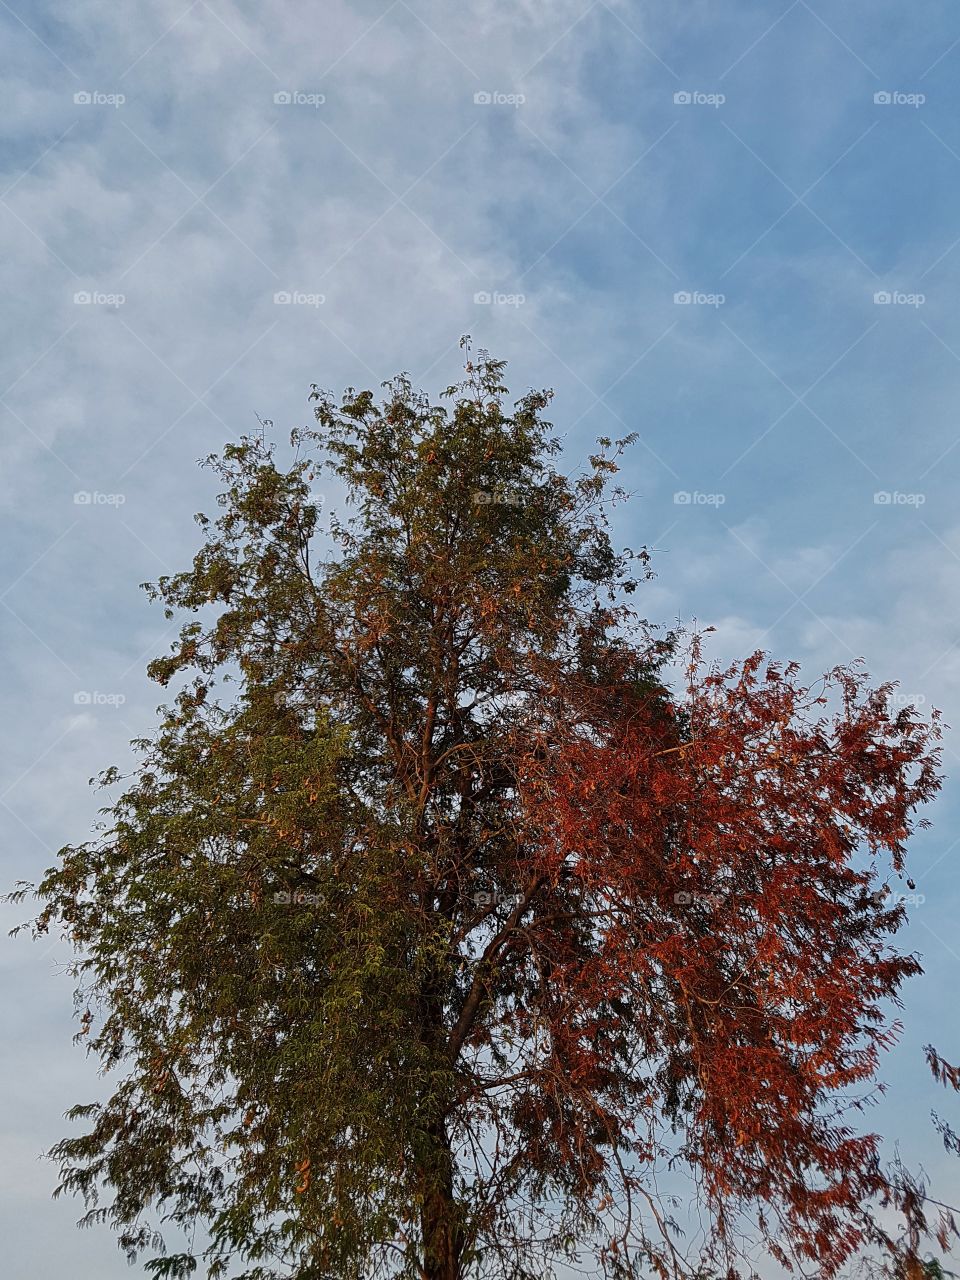 green and red two tones colors of leaves on a tree on a clear blue sky during automn